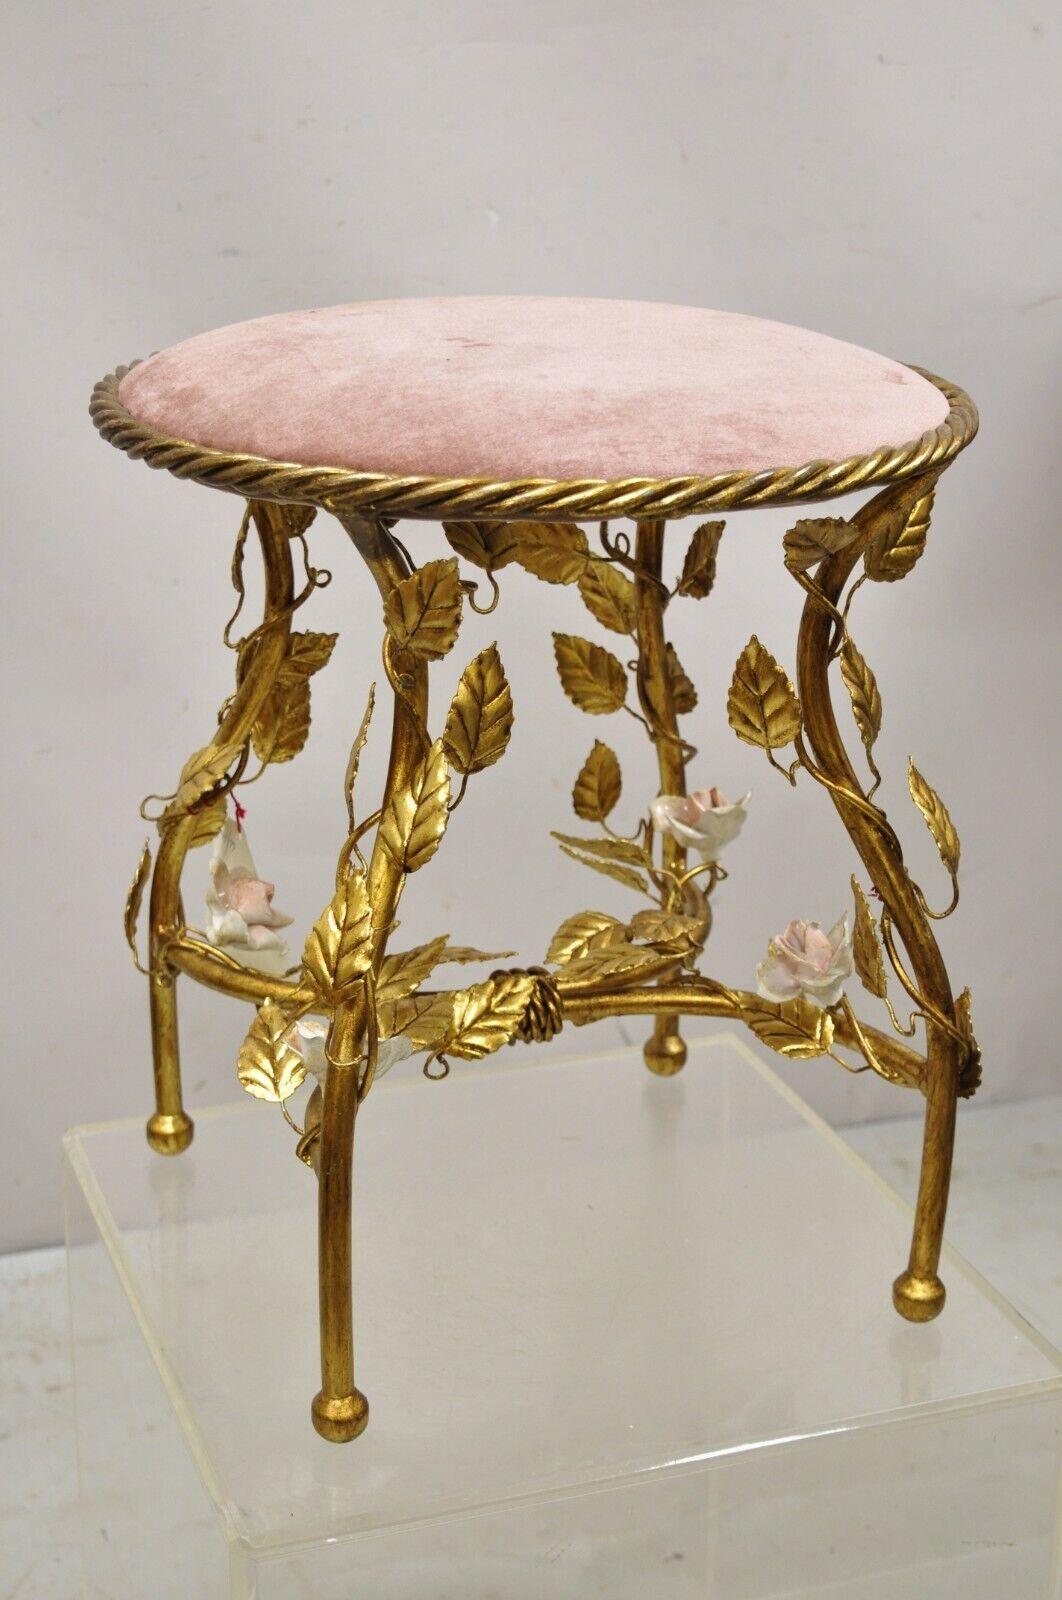 Vintage Italian Hollywood Regency Iron Metal Rope Gold Leaf Gilt Pink Seat Vanity Bench Stool. Item features pink porcelain flower accents to base, gold leaf gilt finish, iron frame, rope form seat, original label, very nice vintage item, quality